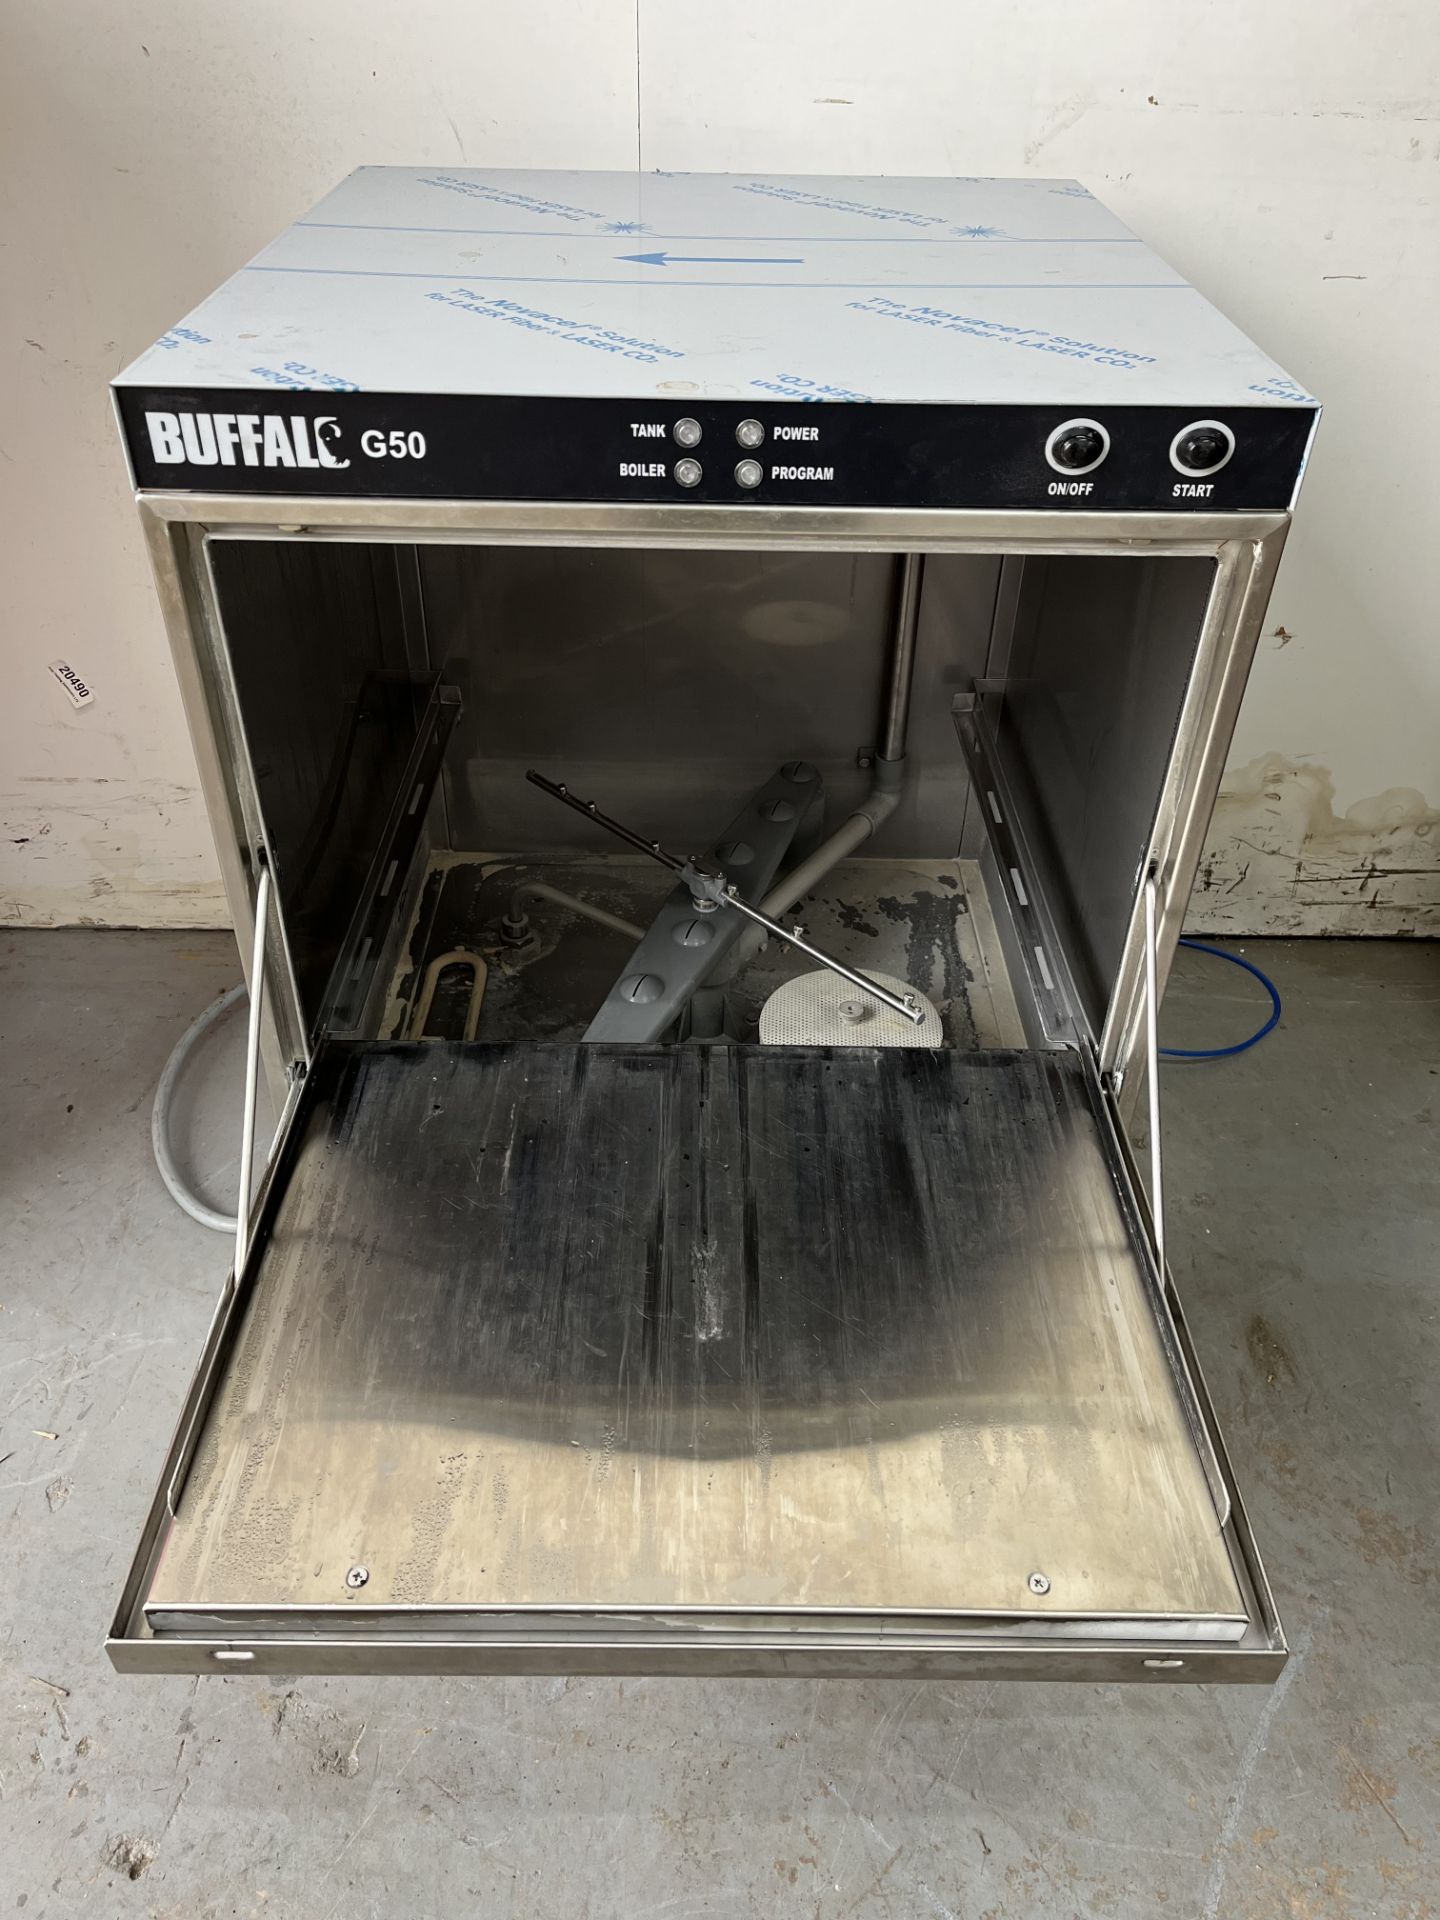 Buffalo Undercounter Glasswasher with Drain Pump 500x500mm Baskets - Image 2 of 6